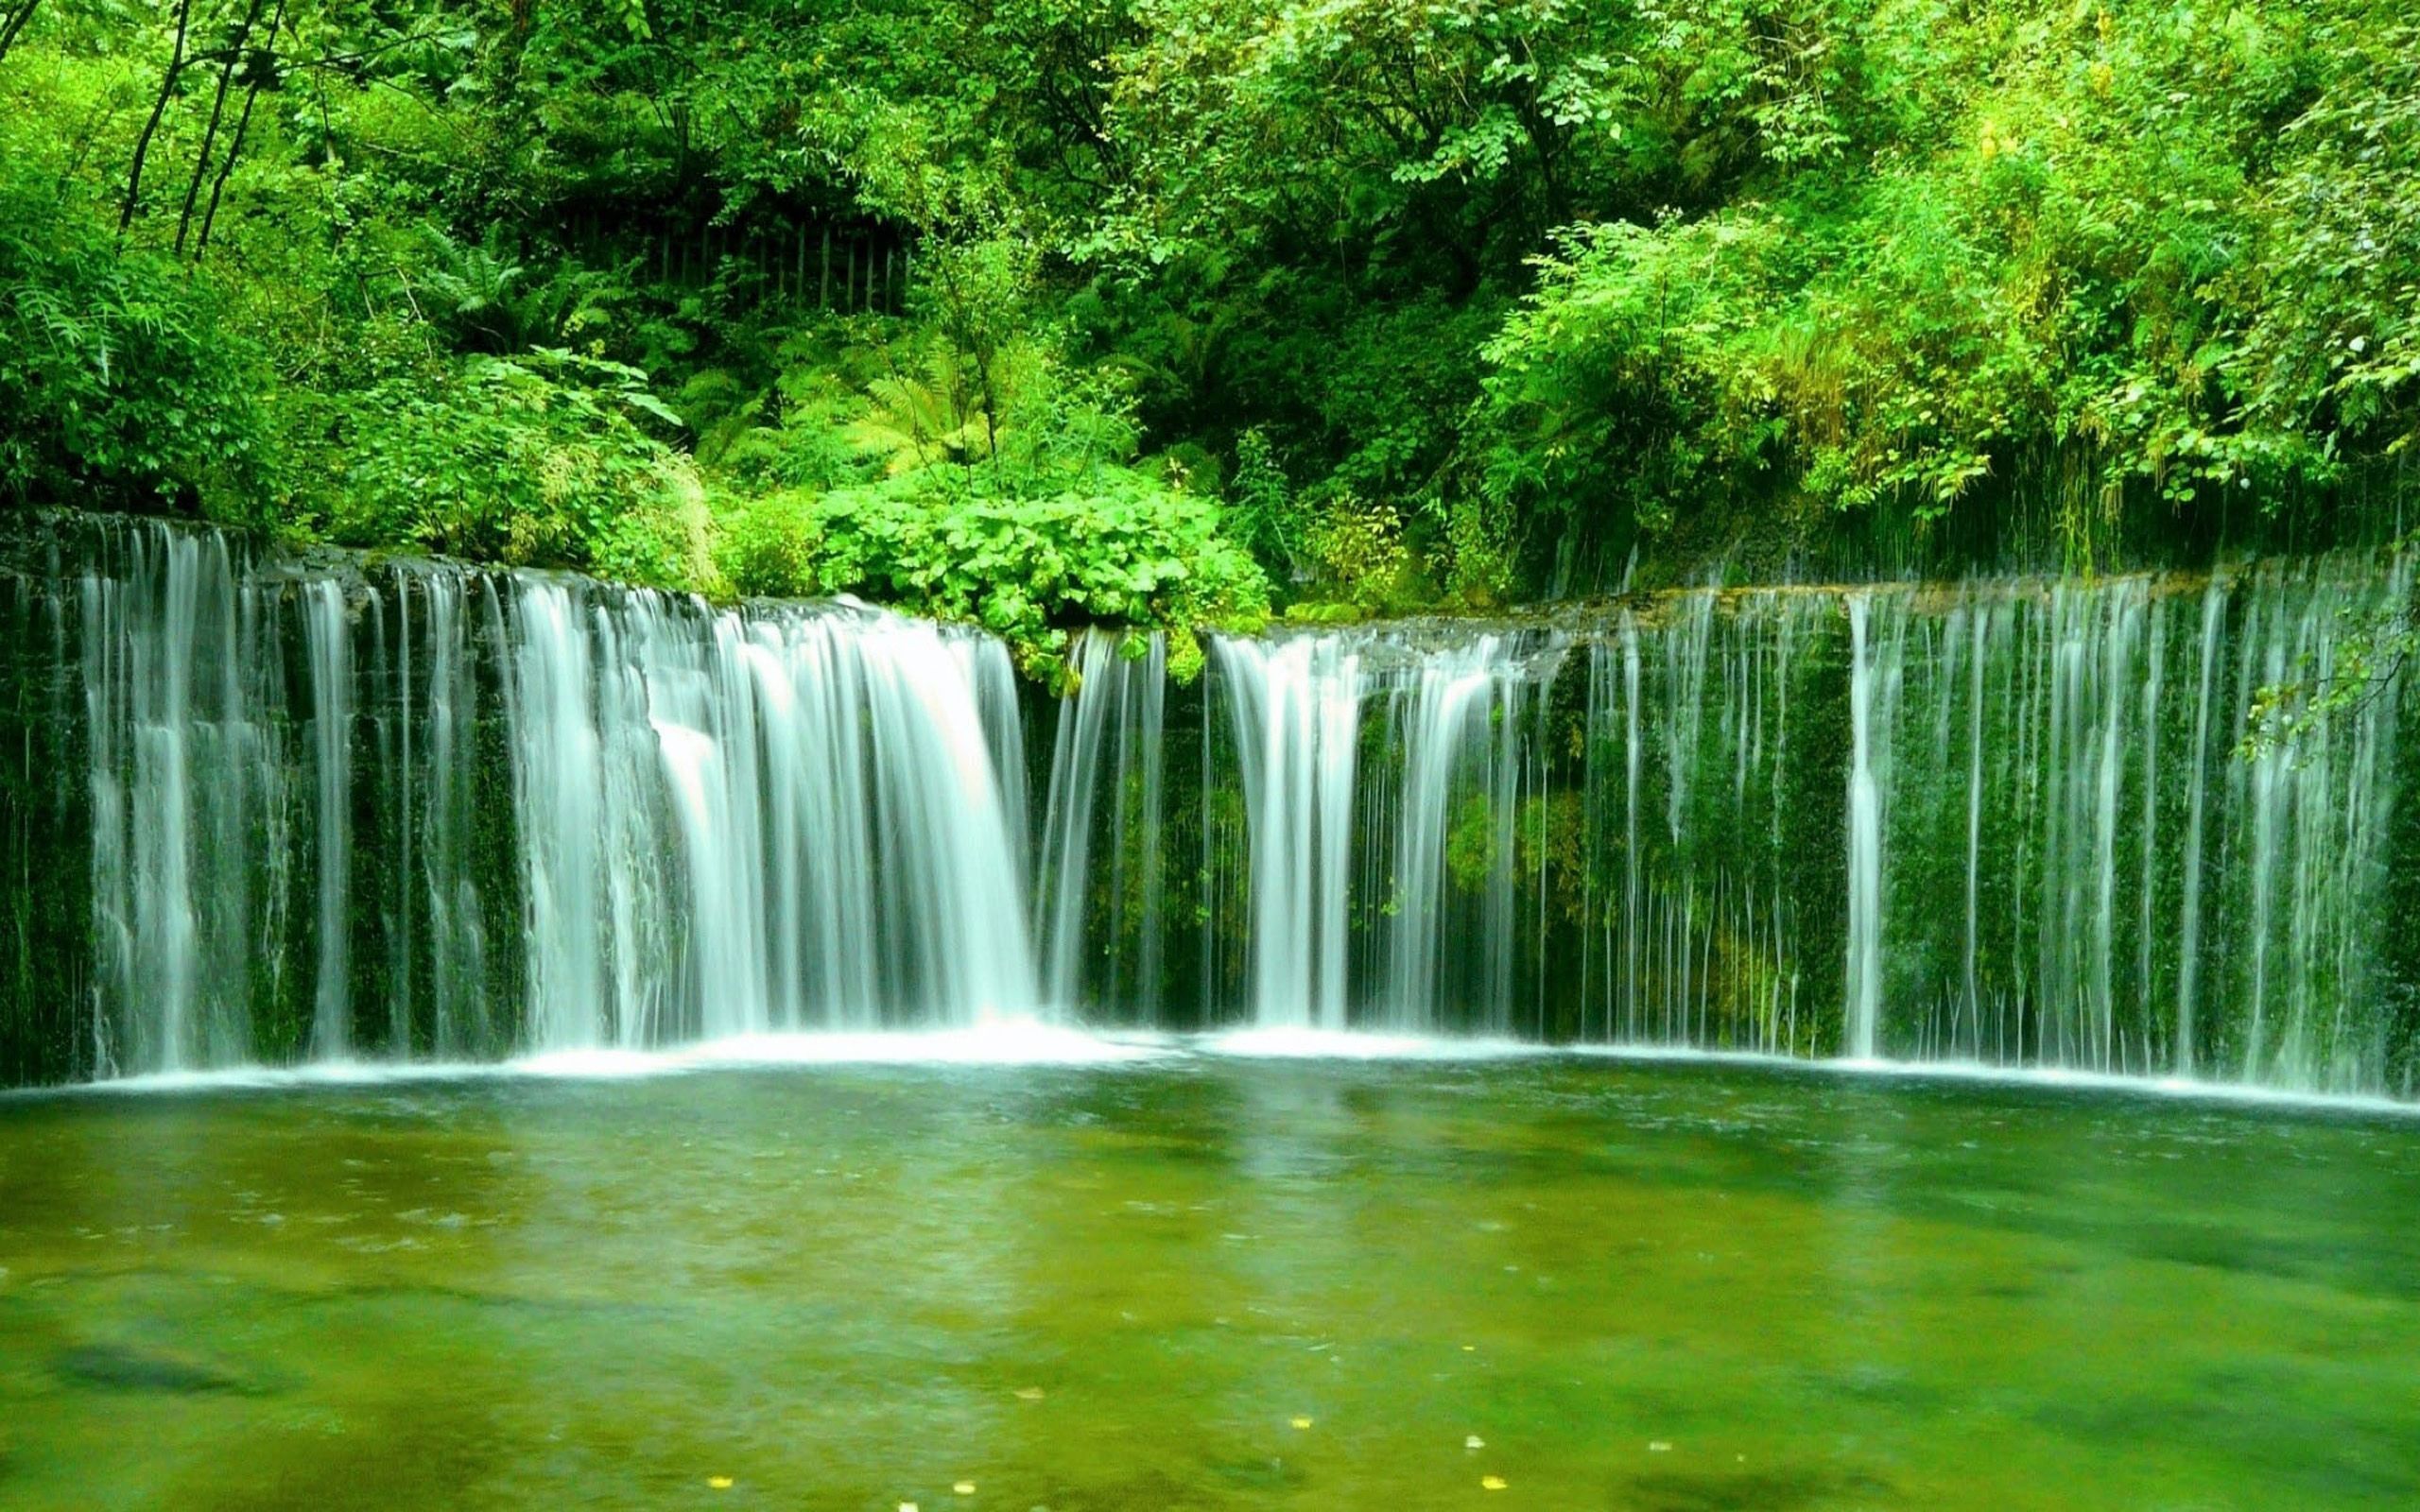 Beautiful Nature Wallpaper for Desktop with Small Waterfall in